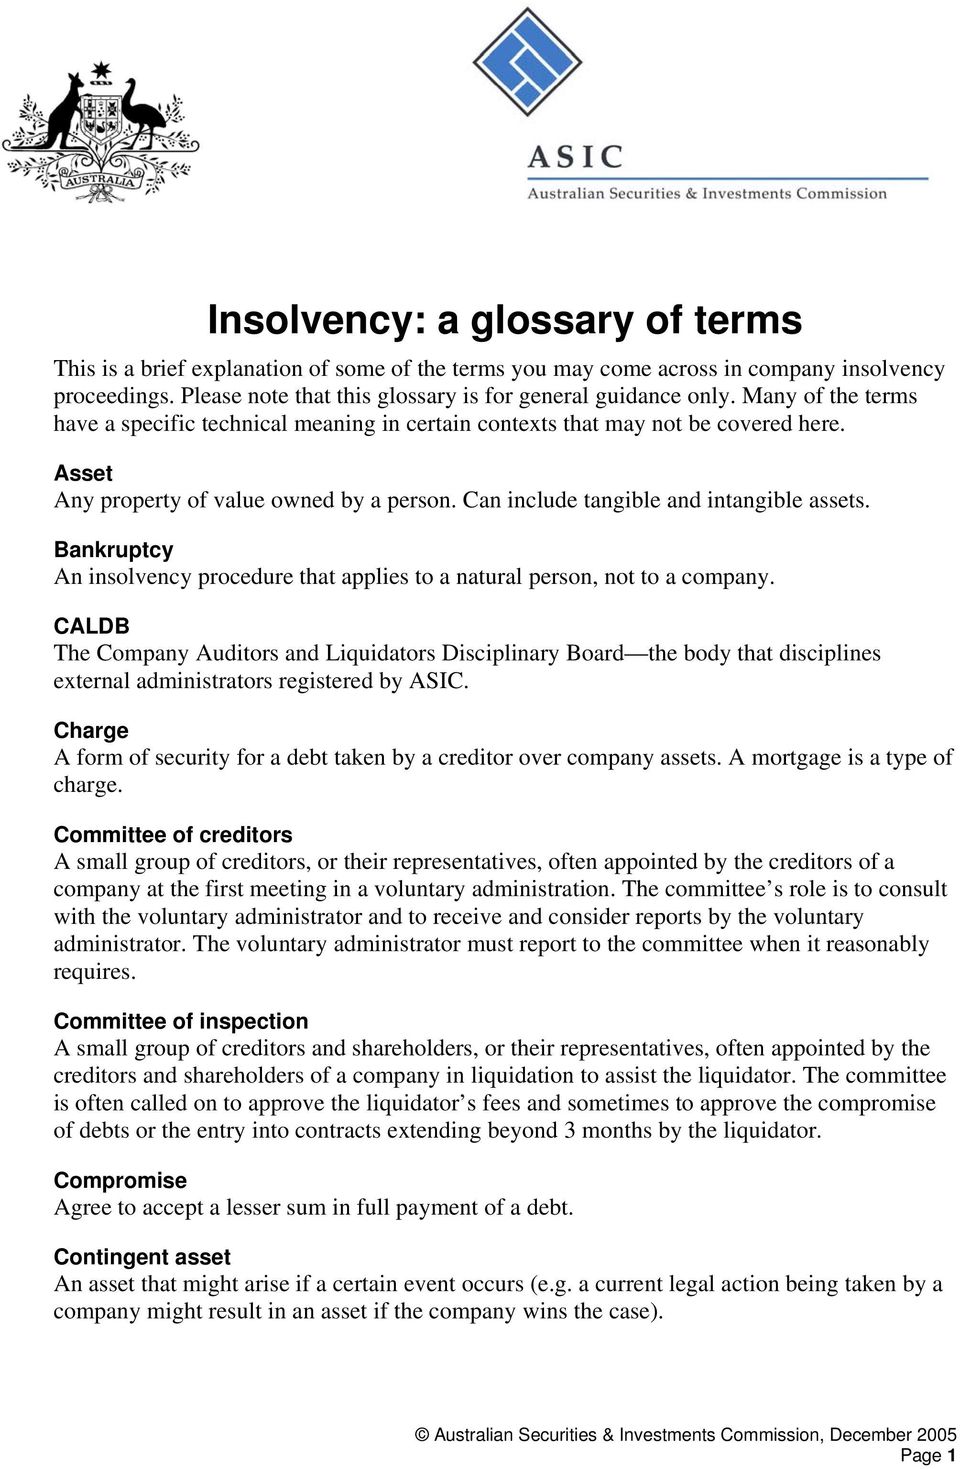 Bankruptcy An insolvency procedure that applies to a natural person, not to a company.